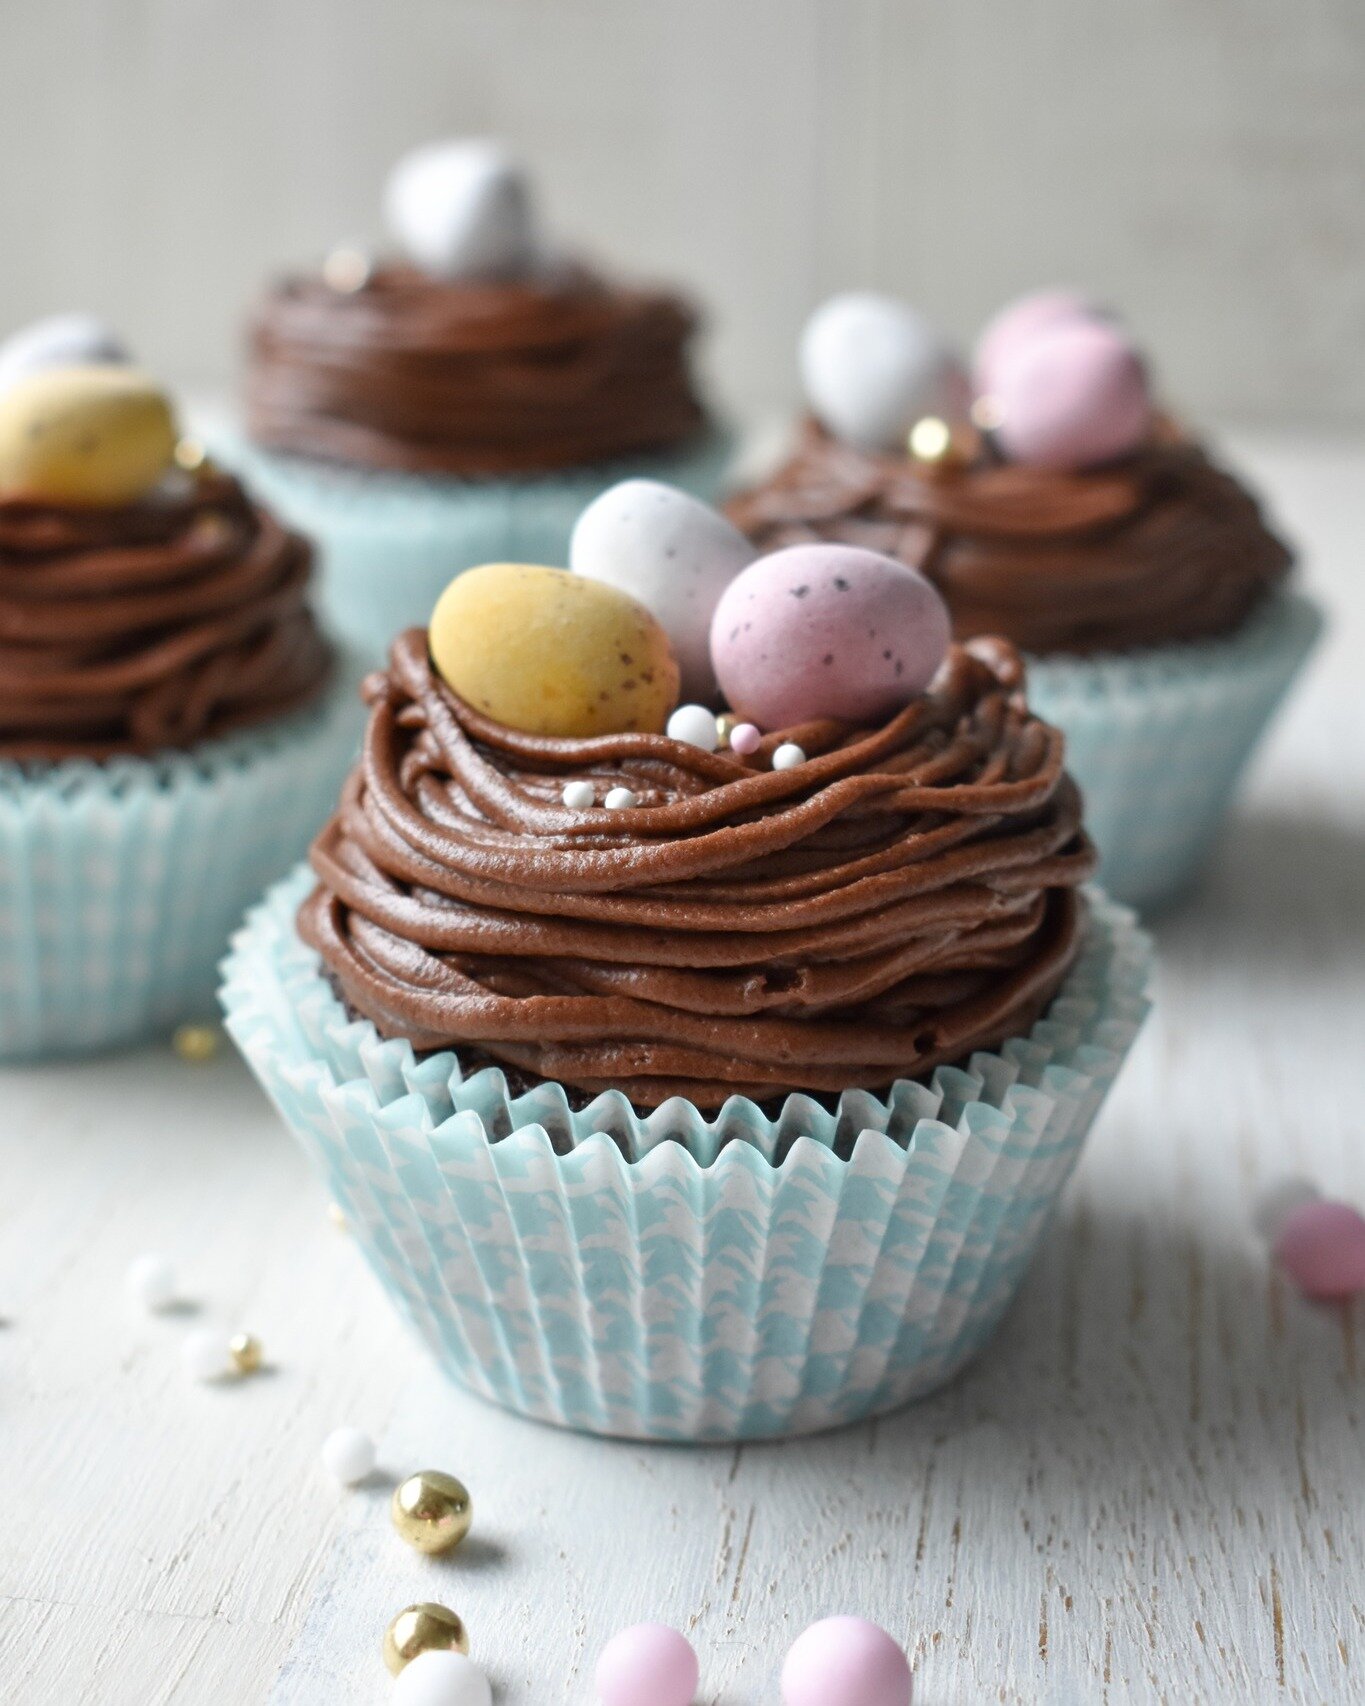 Easter is nearly here! 
Fun little Easter cucpakes I made today. They were nice and simple, below are the steps I followed. 

1. Make your favourite cupcakes (or you could buy your favourite from the store). 
2. 1tbsp soft butter + 2tbsp cocoa + 1 1/